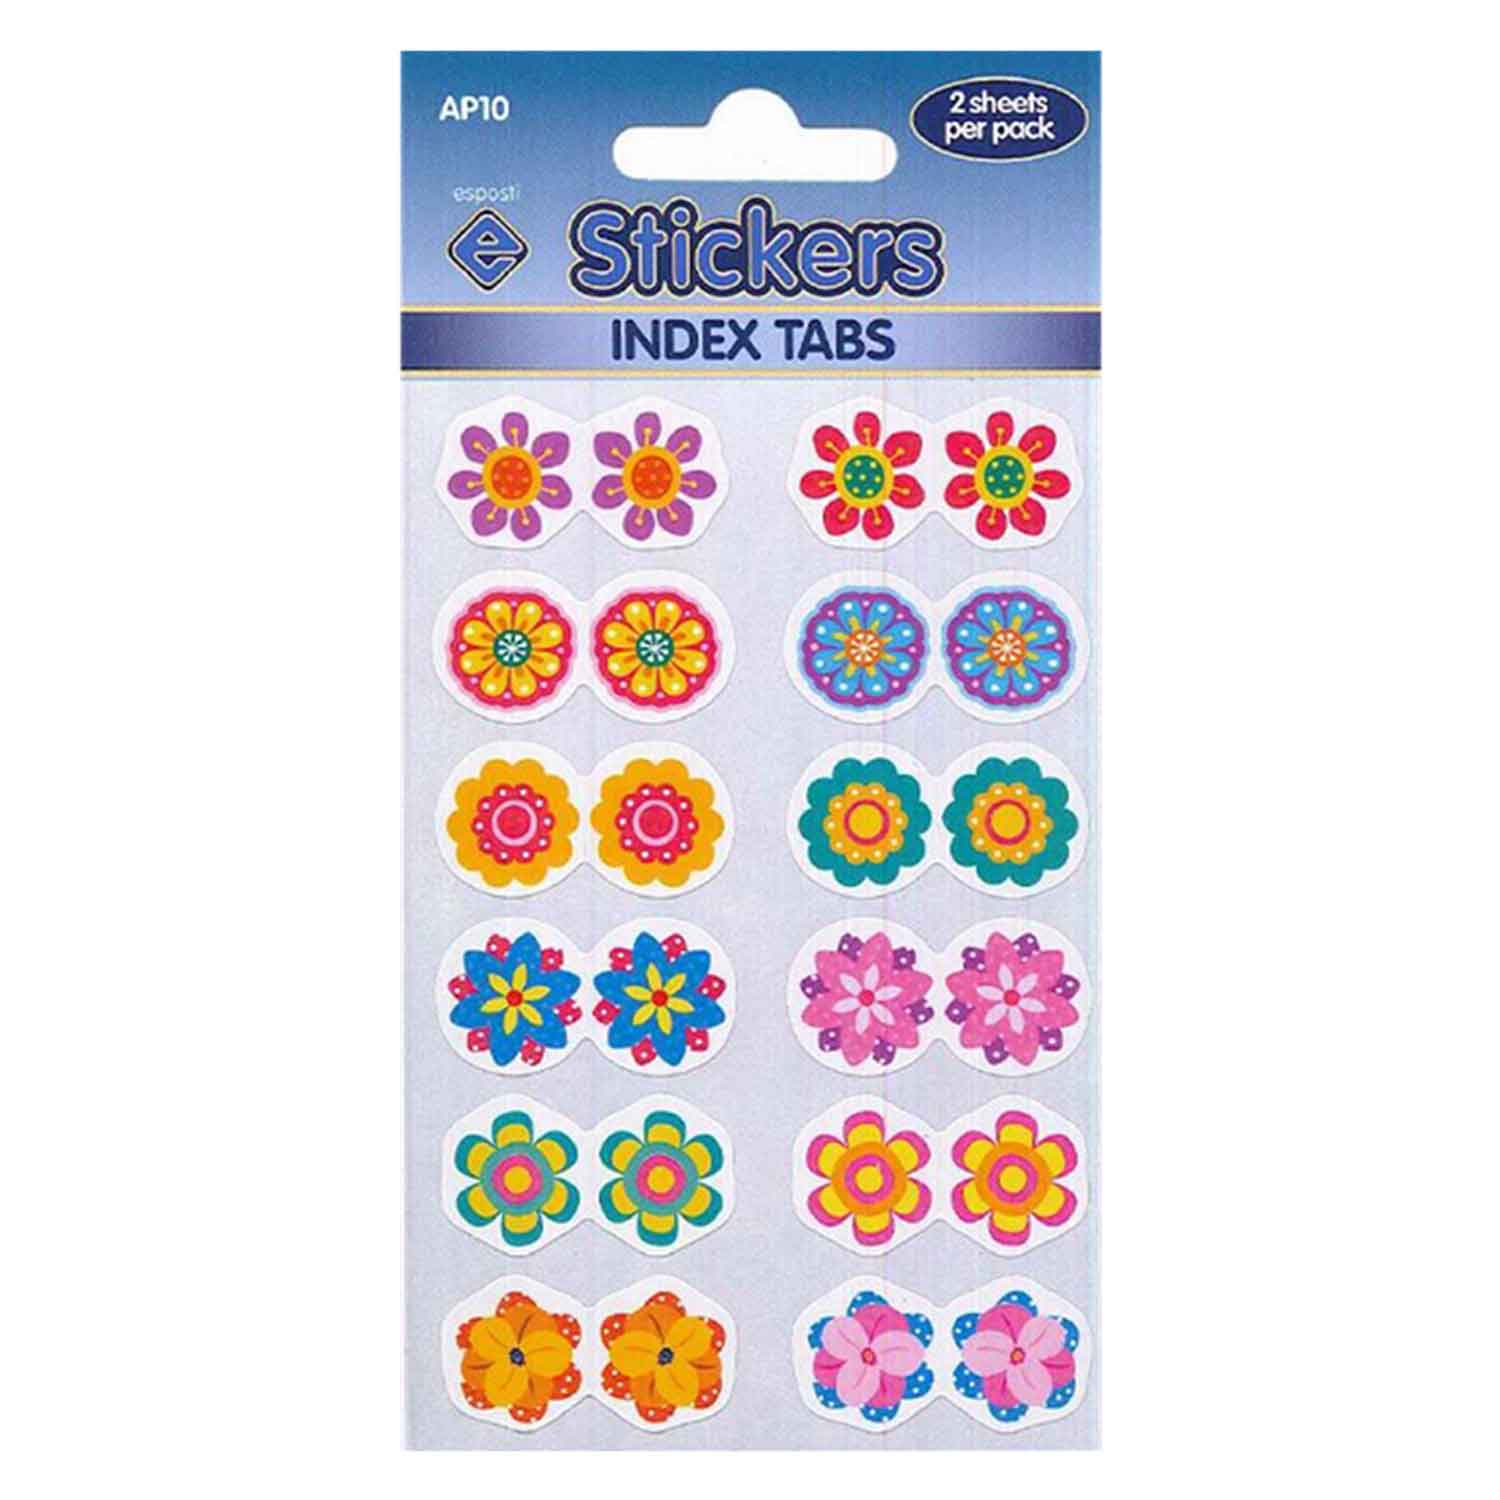 Flowers Self Adhesive Novelty Stickers - Pack of 10